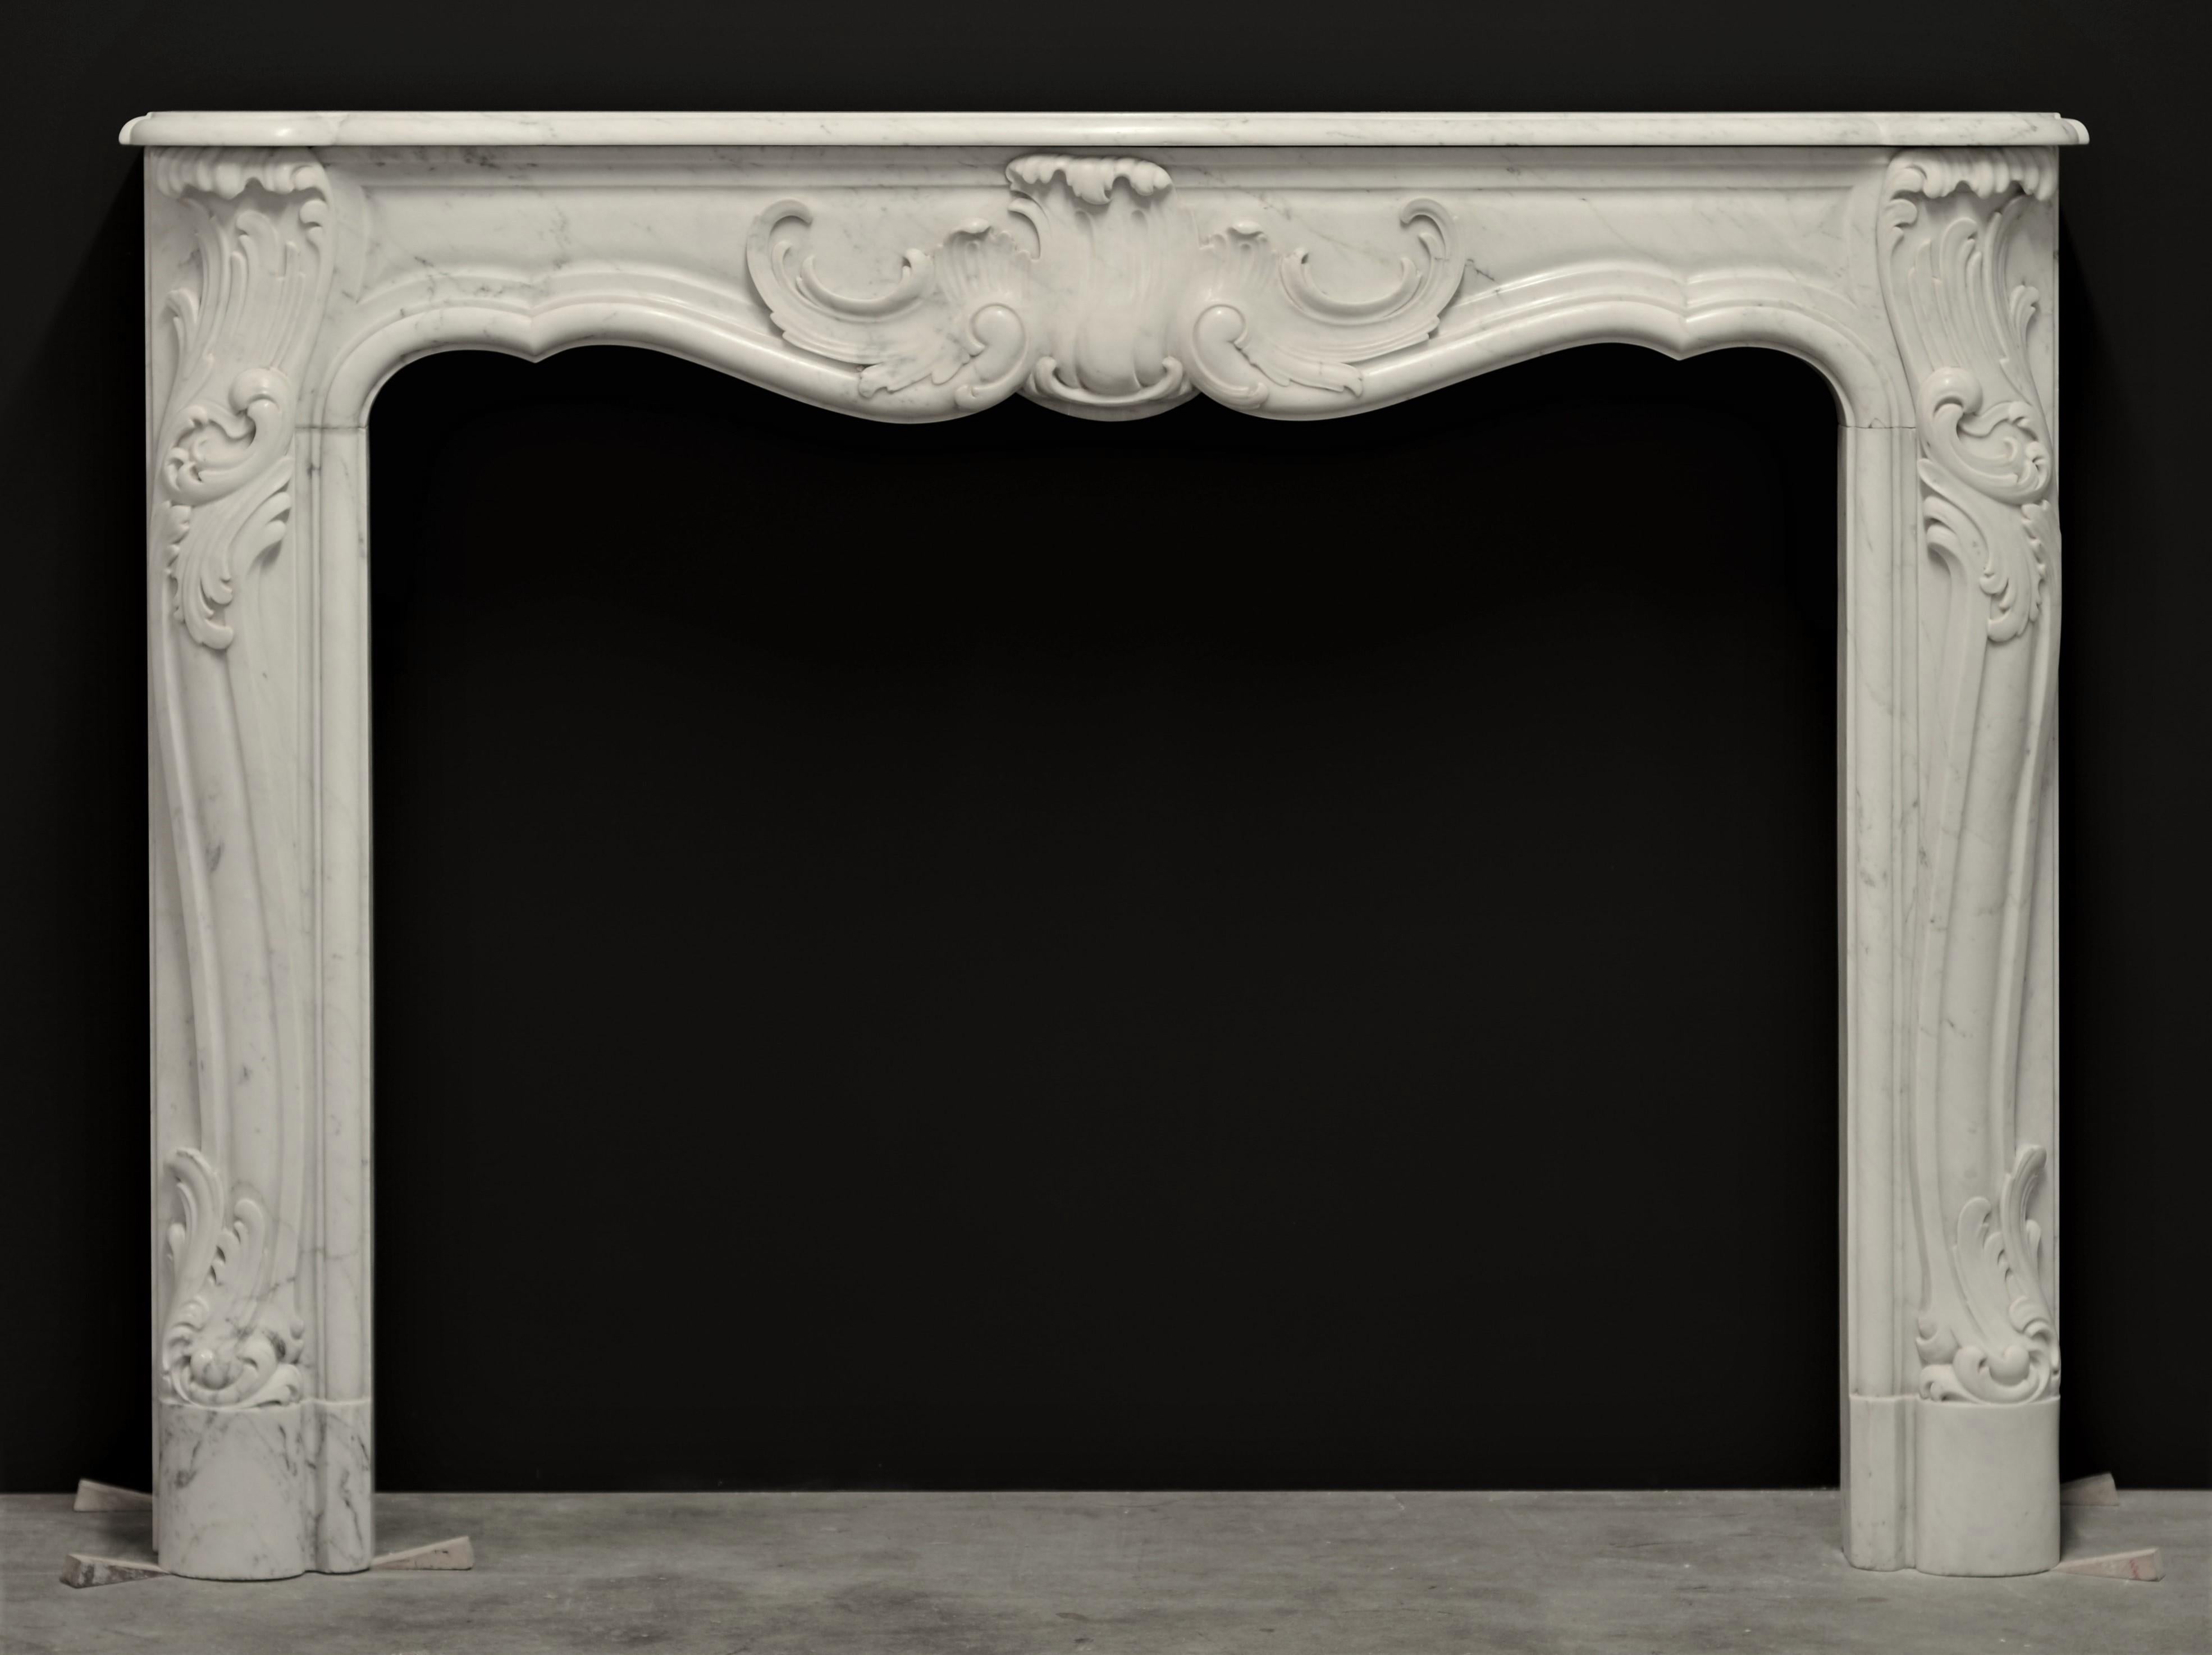 Rococo Revival Rococo Style Fireplace Mantel in White Marble